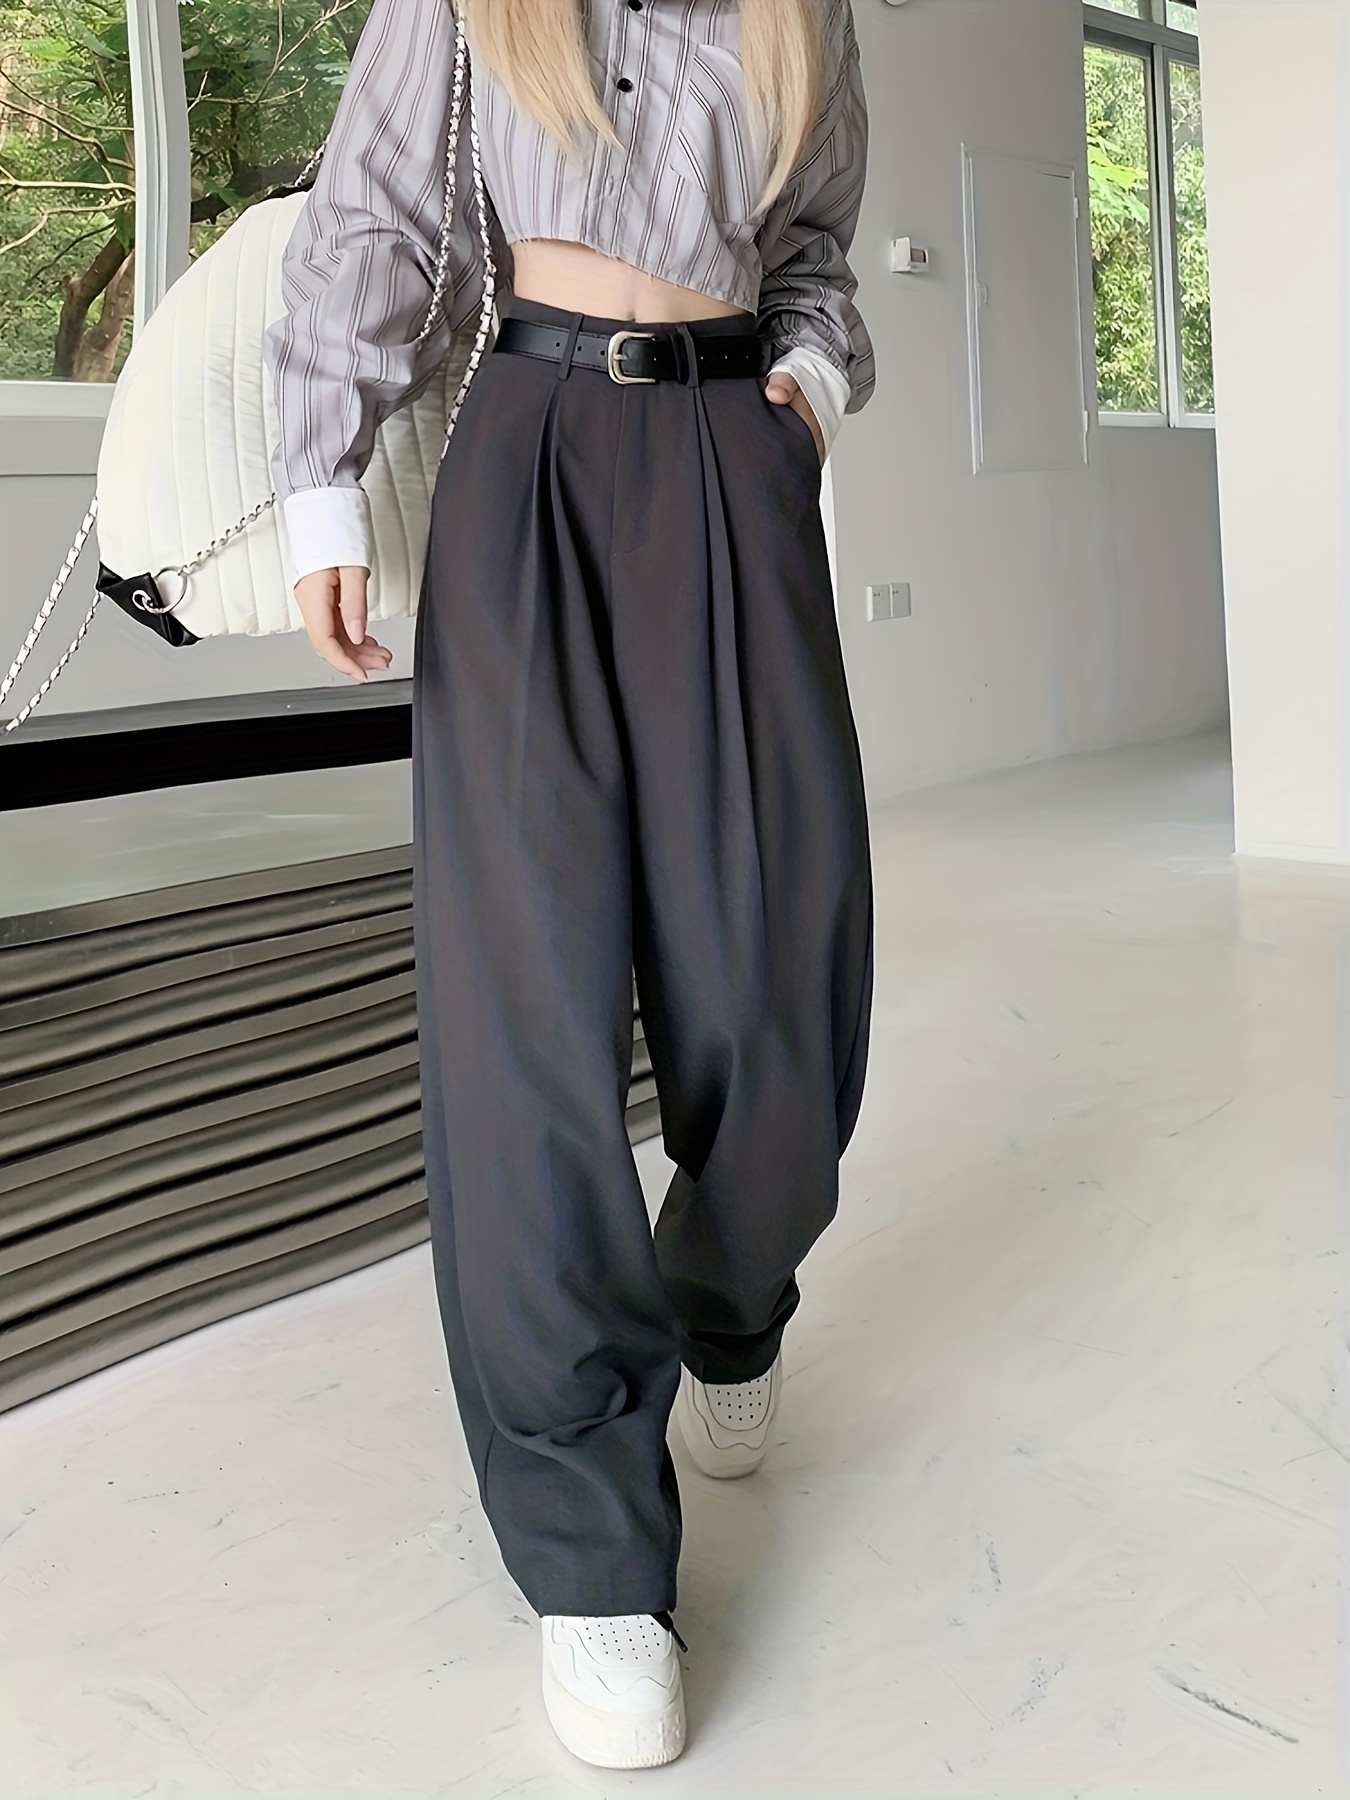 Womens Dress Pants Solid Casual Loose Baggy High Waist Straight Wide Leg  Pull On Office Business Pants Work Trousers 